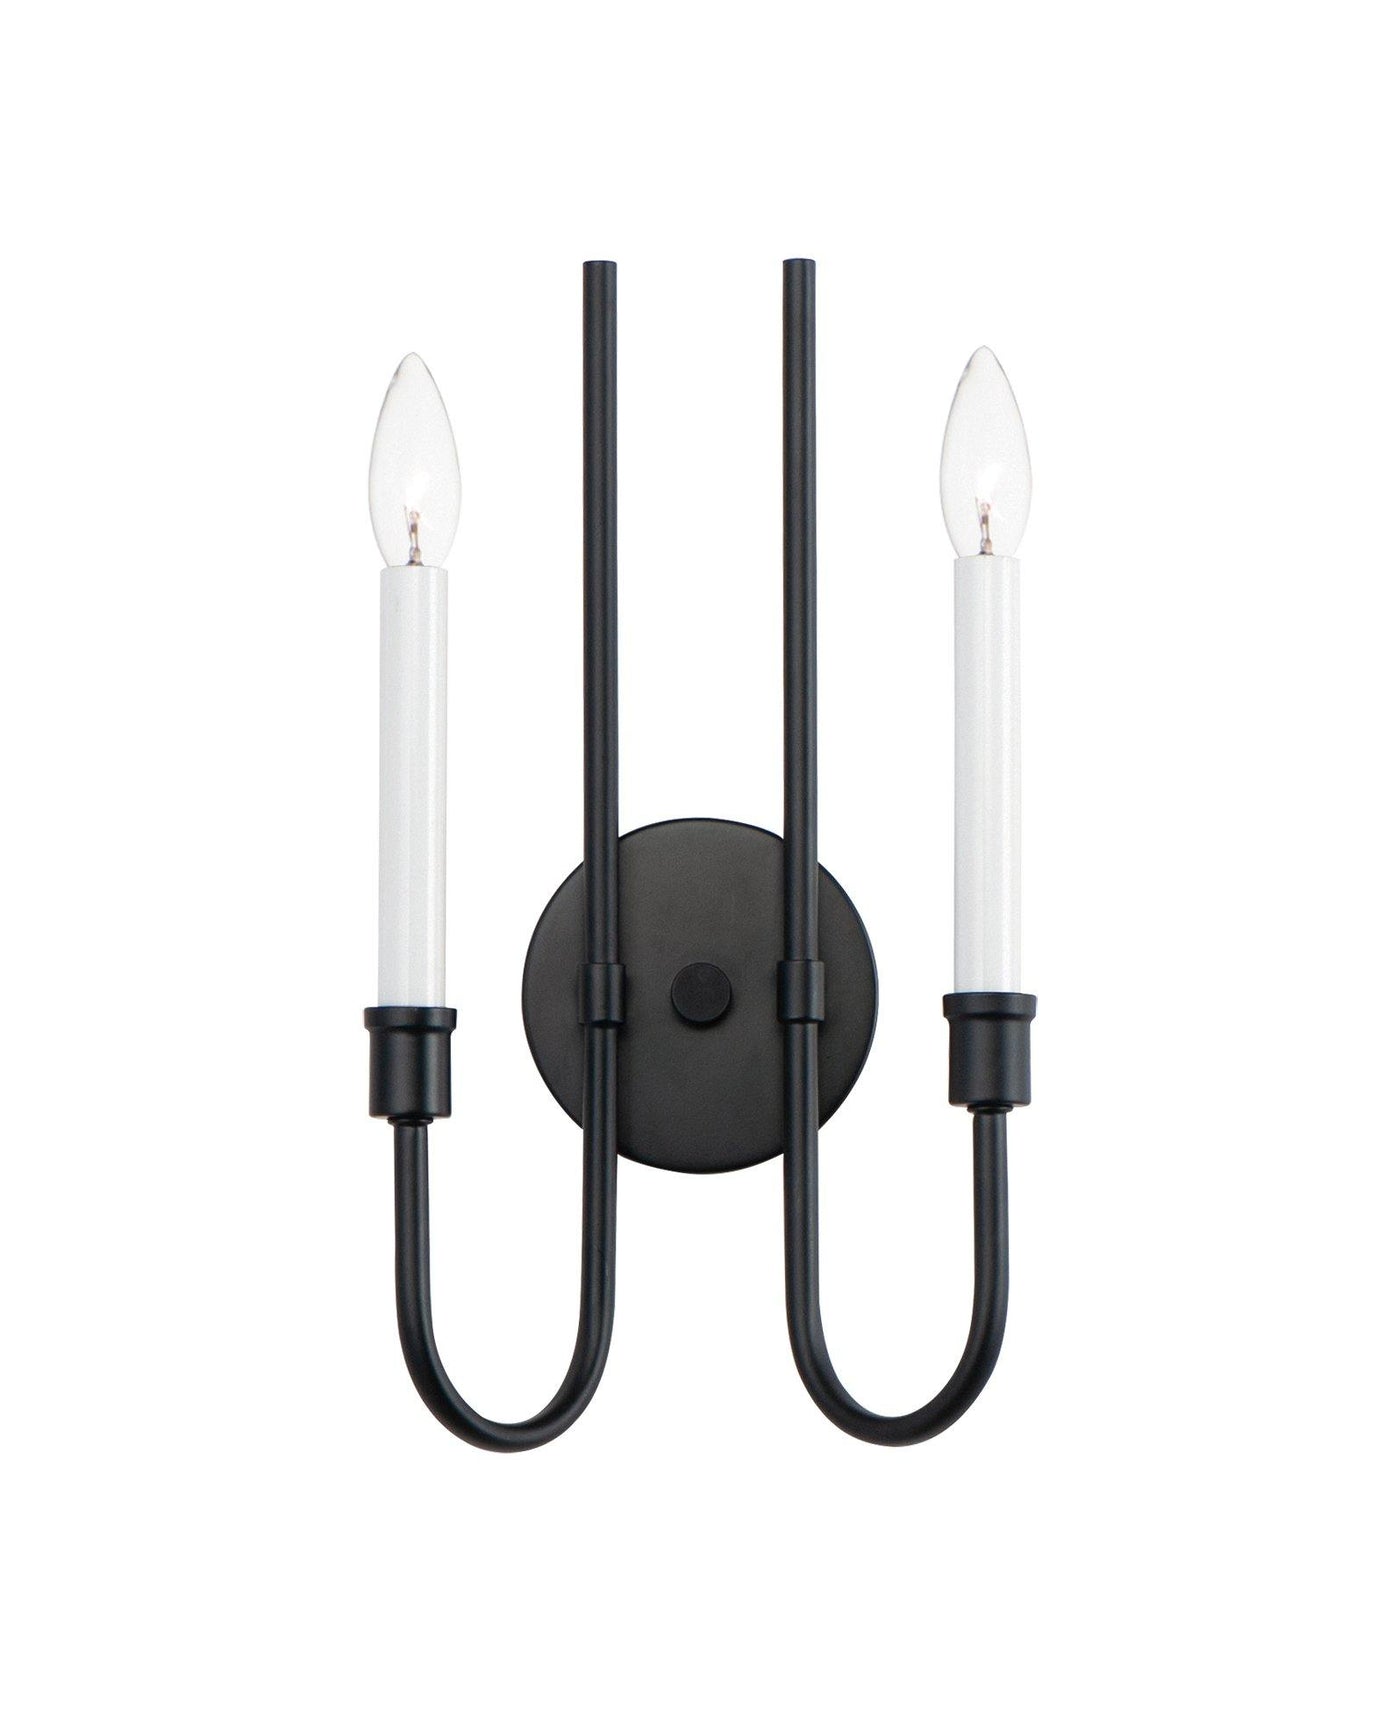 Black with 2 Light Wall Sconce - LV LIGHTING